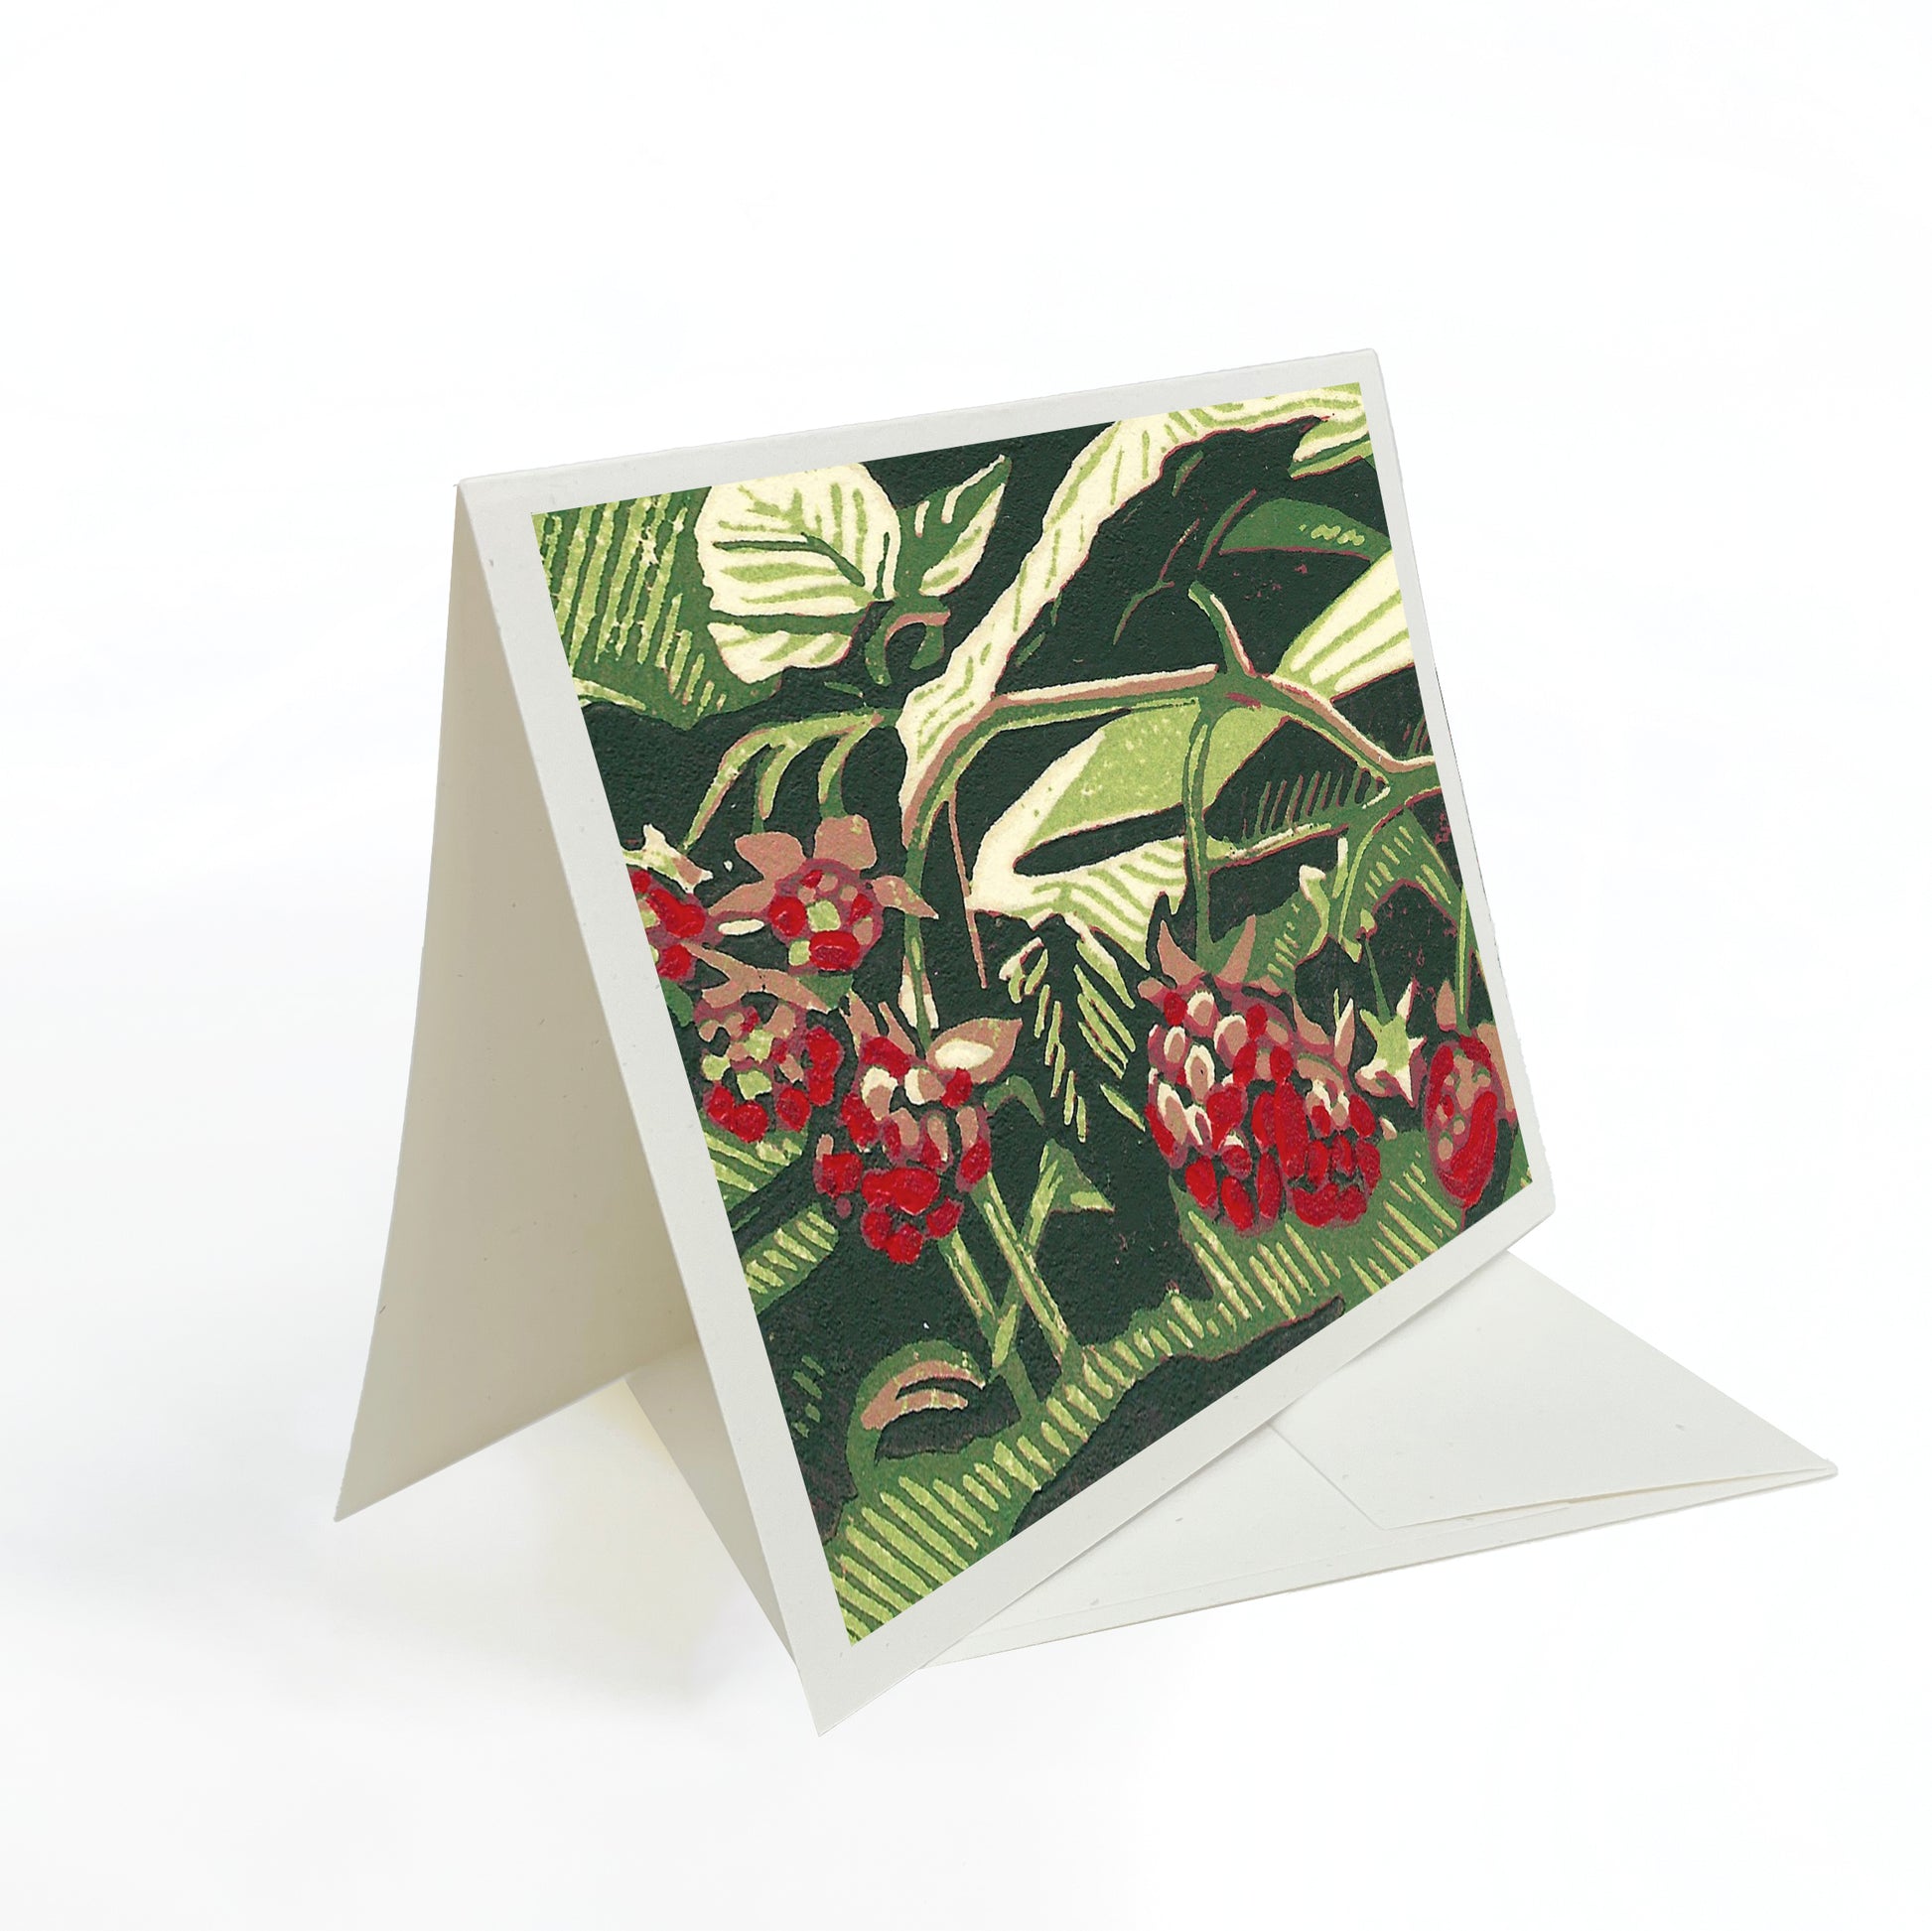 A casually elegant card featuring floral art by Natalia Wohletz of Peninsula Prints titled Wild Raspberries.